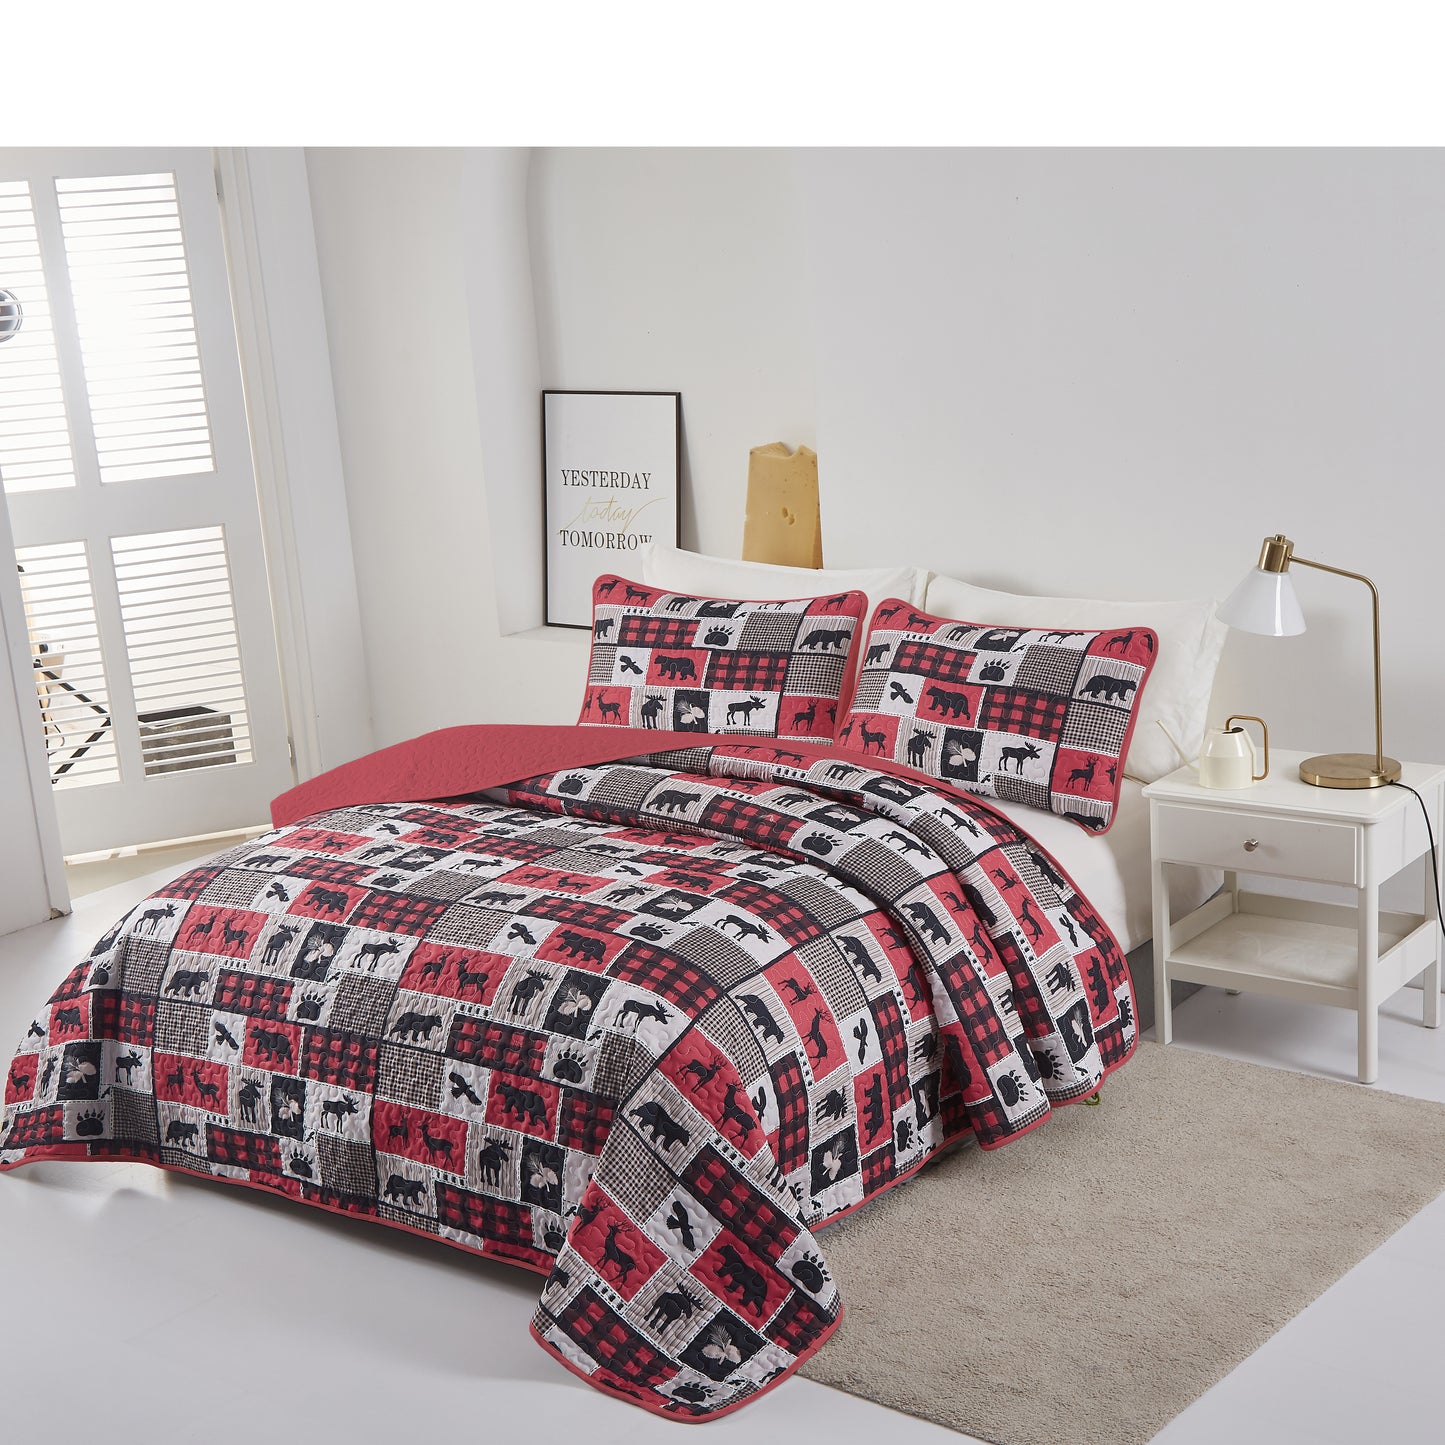 Animal Square Stitching Quilt Set Coverlet with 2 Pillowcases